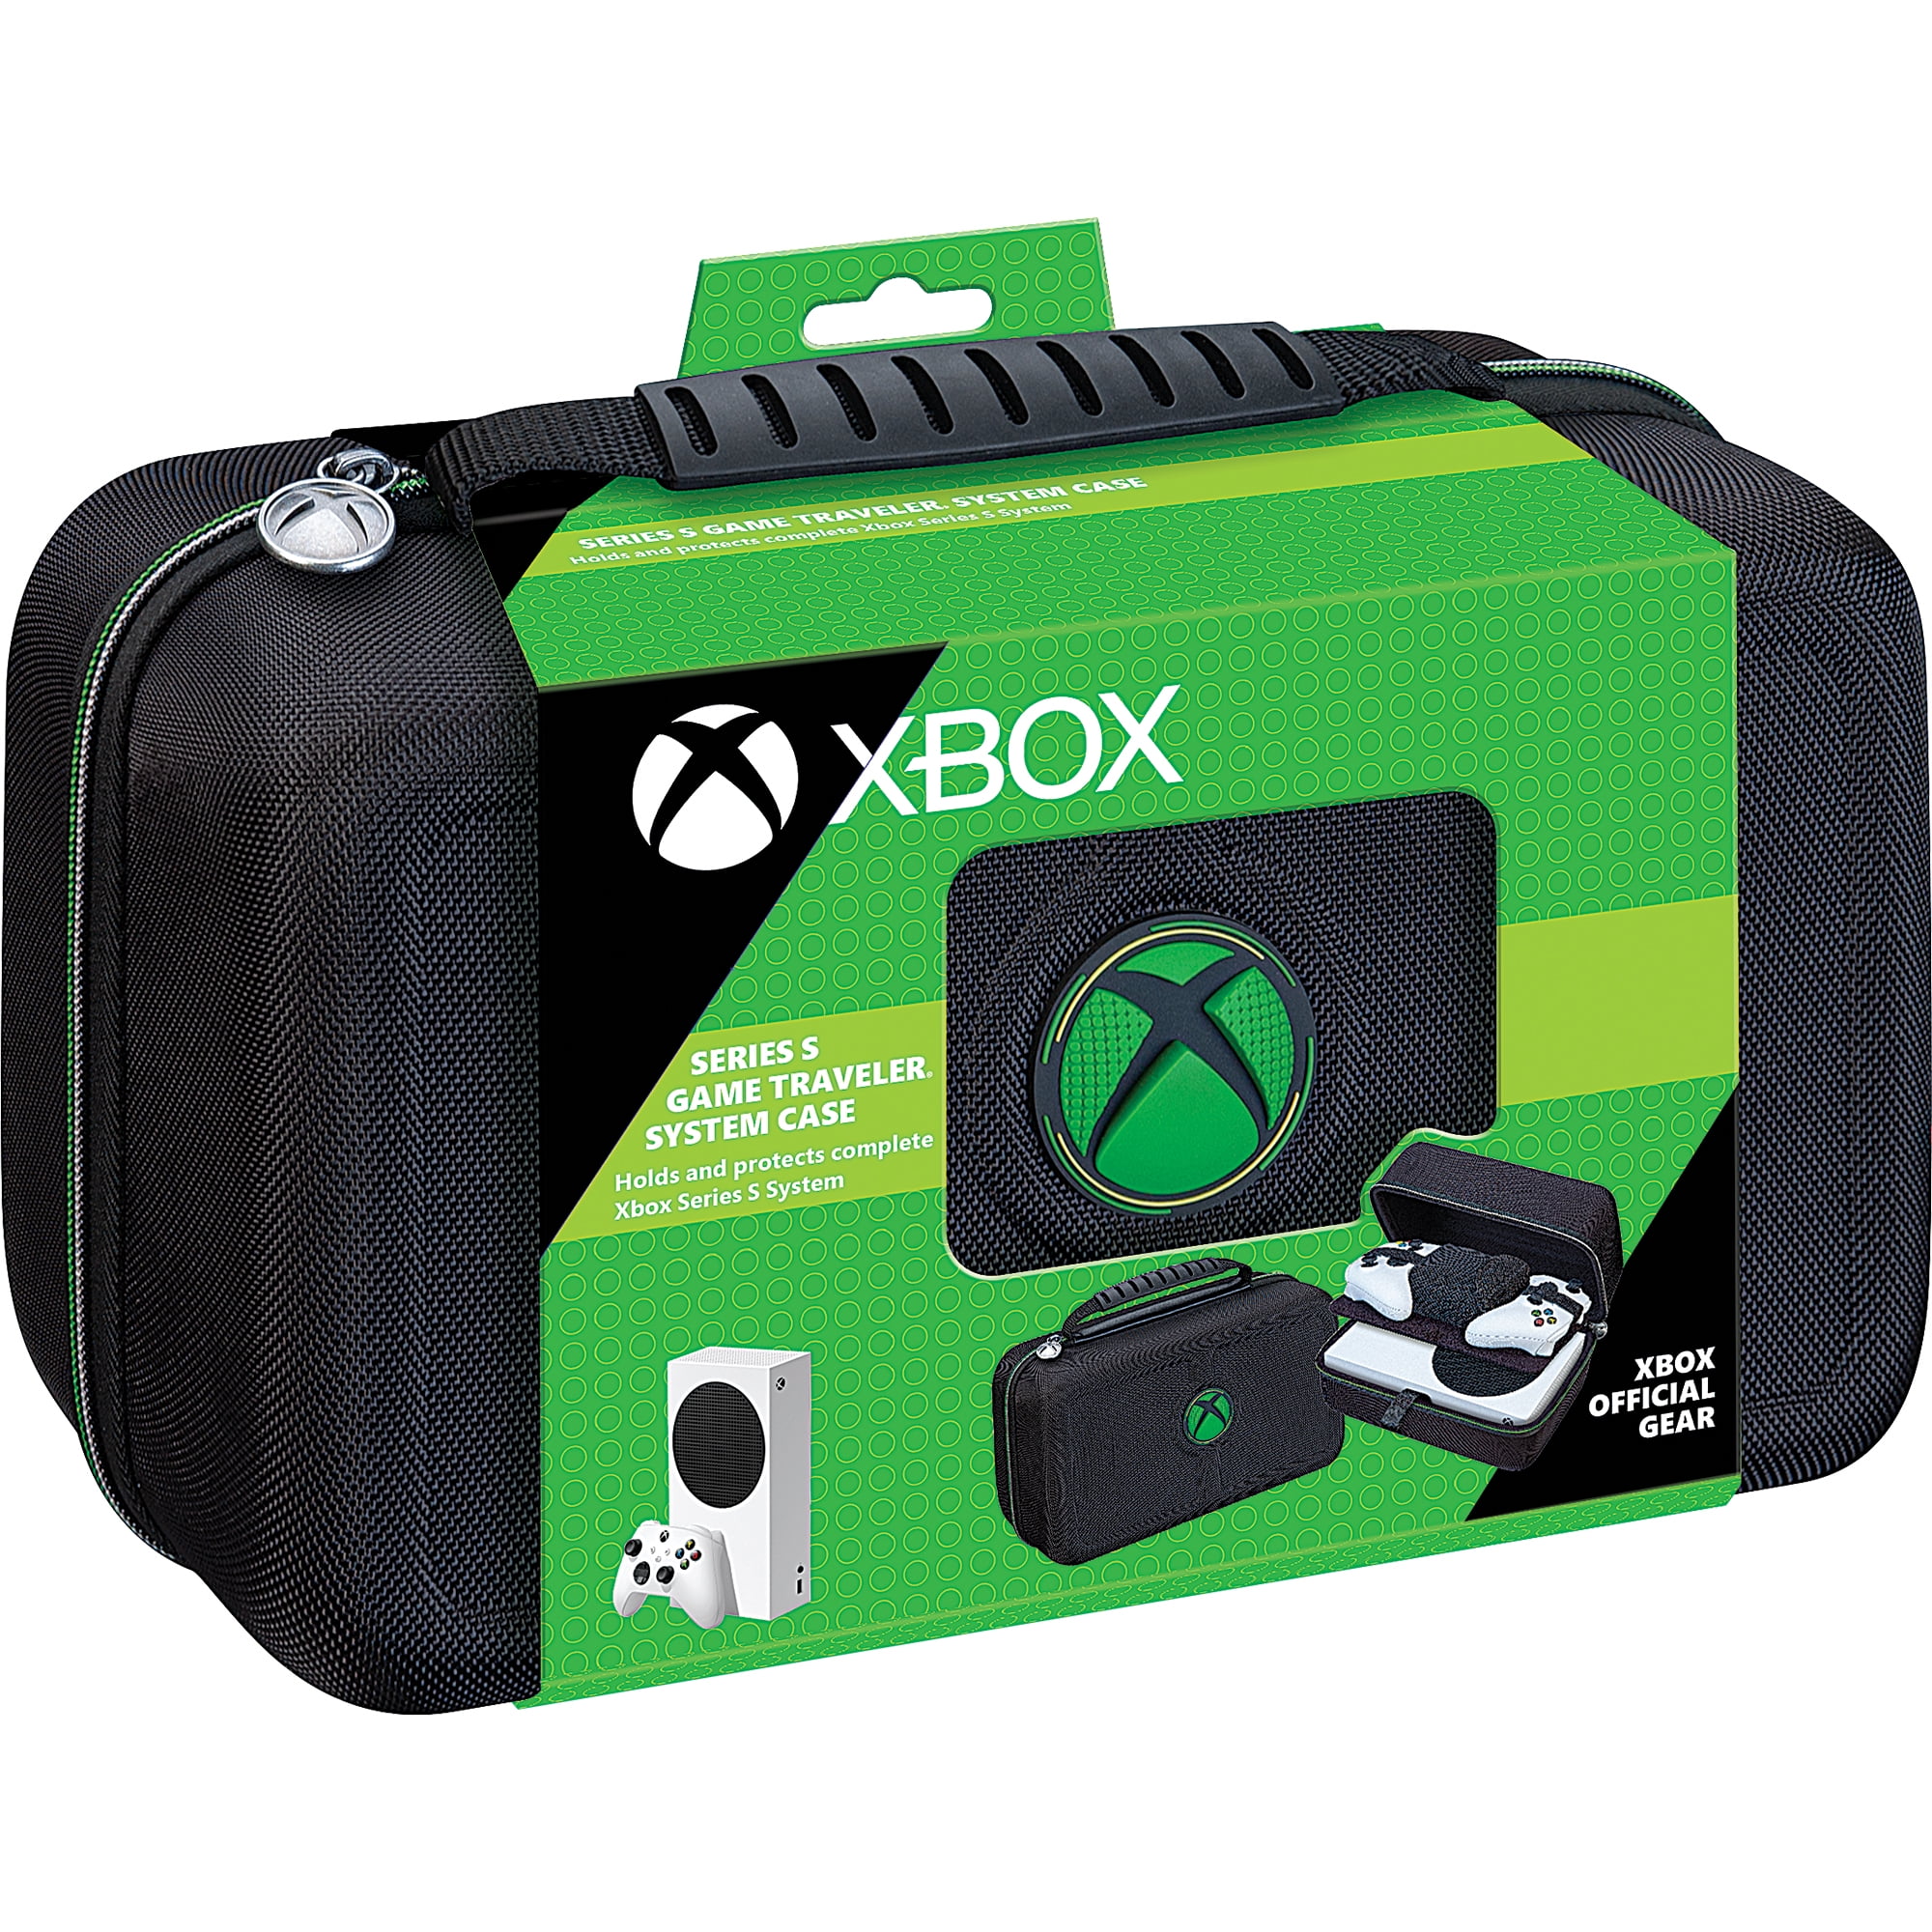 I Bought the PORTABLE Xbox… 